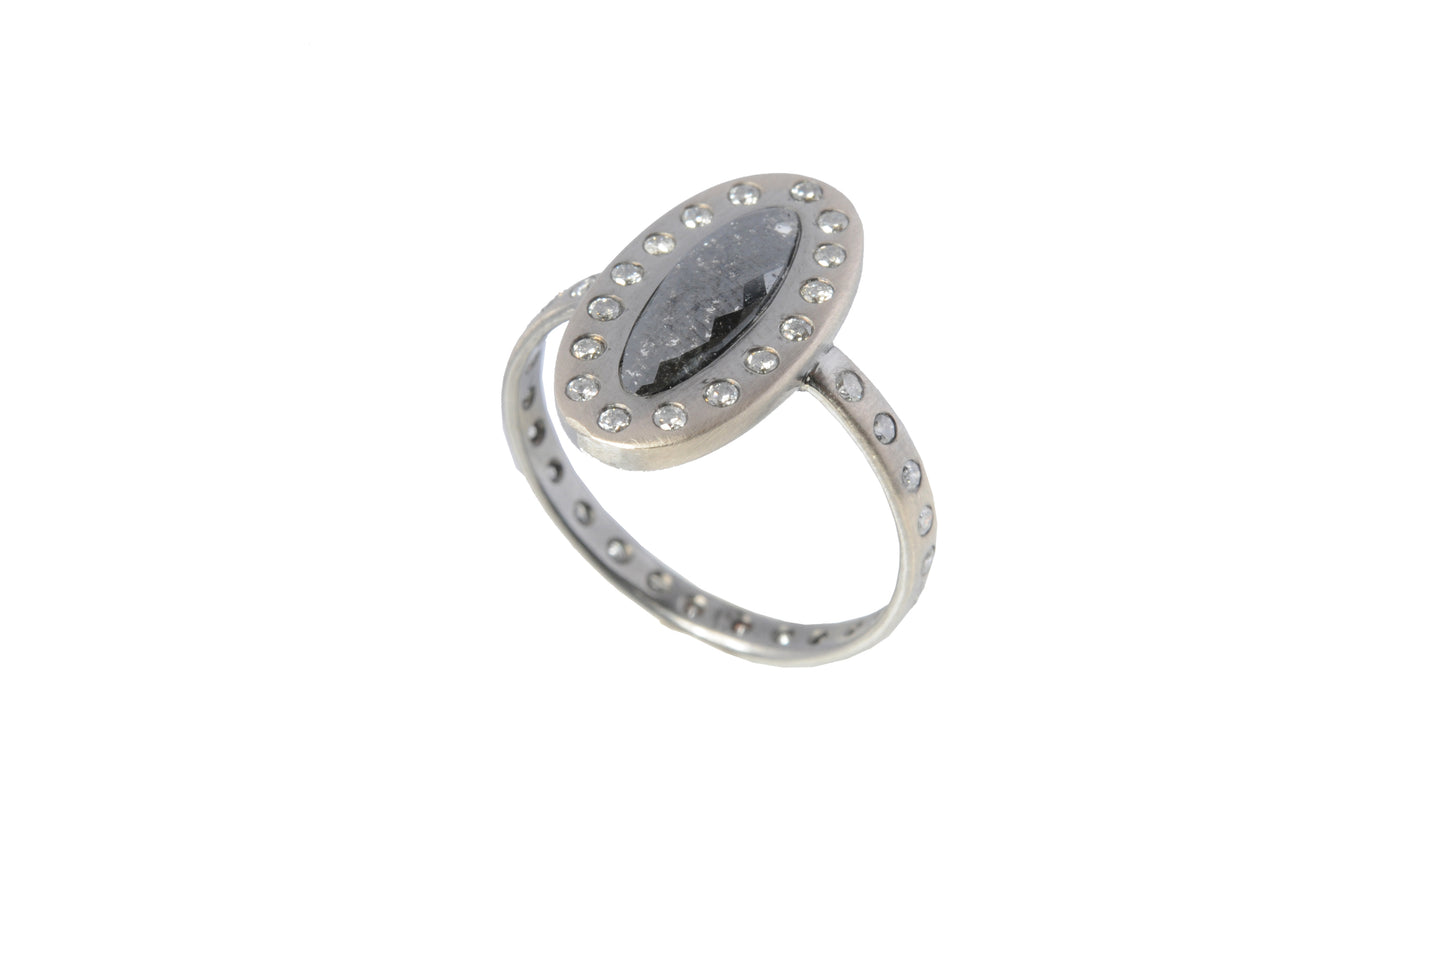 Sweet Pea 18ct white gold black diamond slice ring with salt and pepper diamond surround and set band. Black diamond engagement ring.